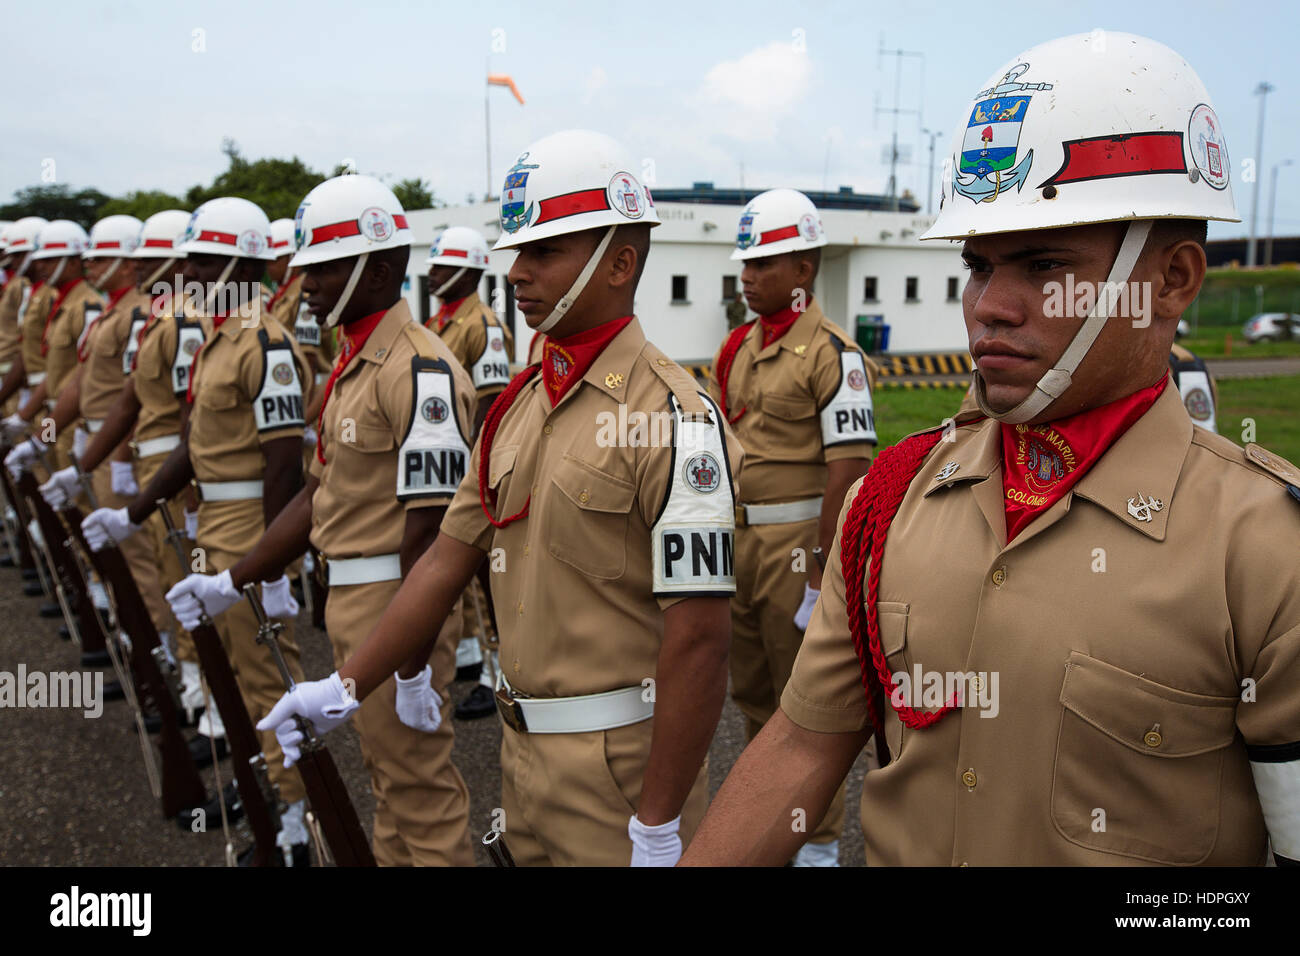 Infanteria de Marina de Colombia soldiers stand in formation for the arrival of senior naval leaders for the Marine Leaders of the Americas Conference at the Marine Infantry Training Base August 27, 2015 in Covenas, Colombia. Stock Photo